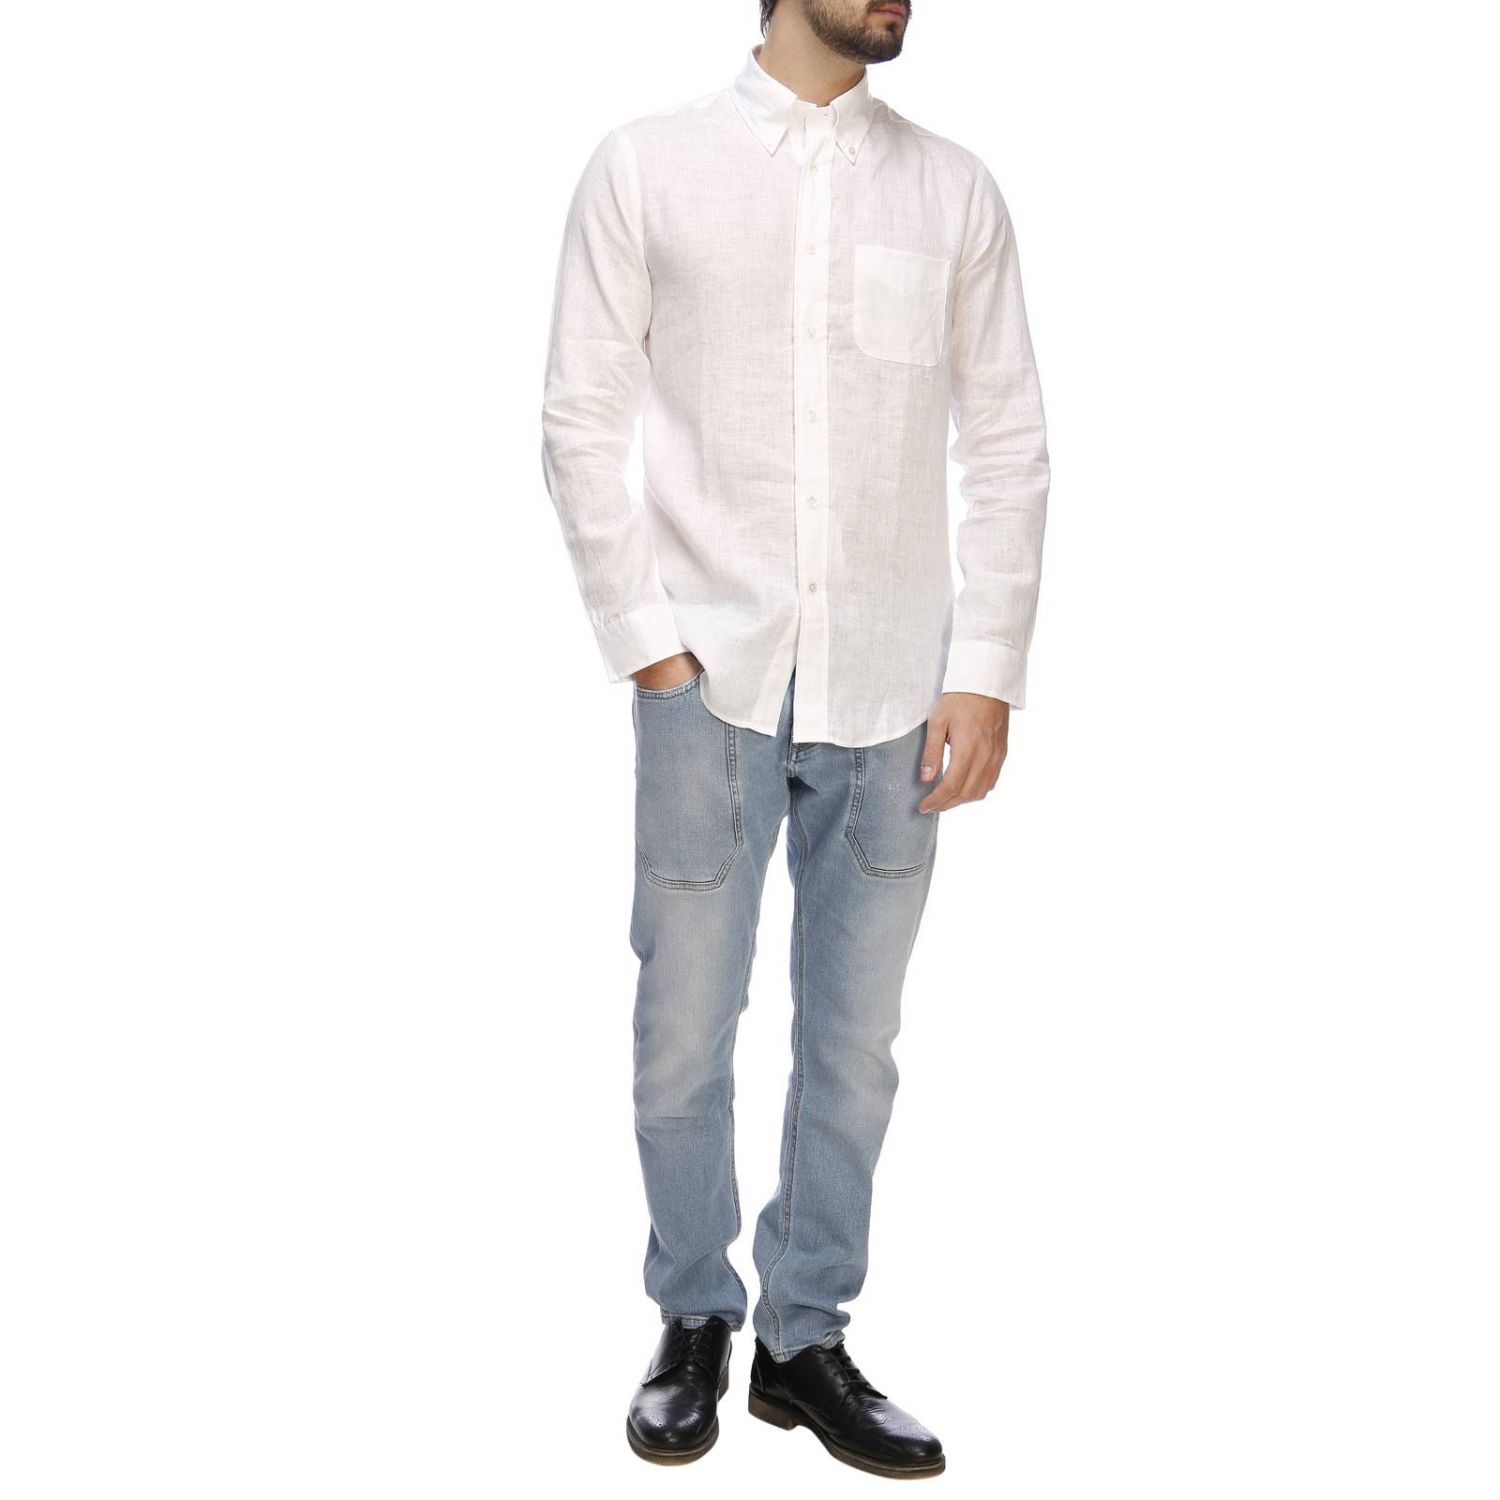 Brooks Brothers Outlet: shirt for man - White | Brooks Brothers shirt ...